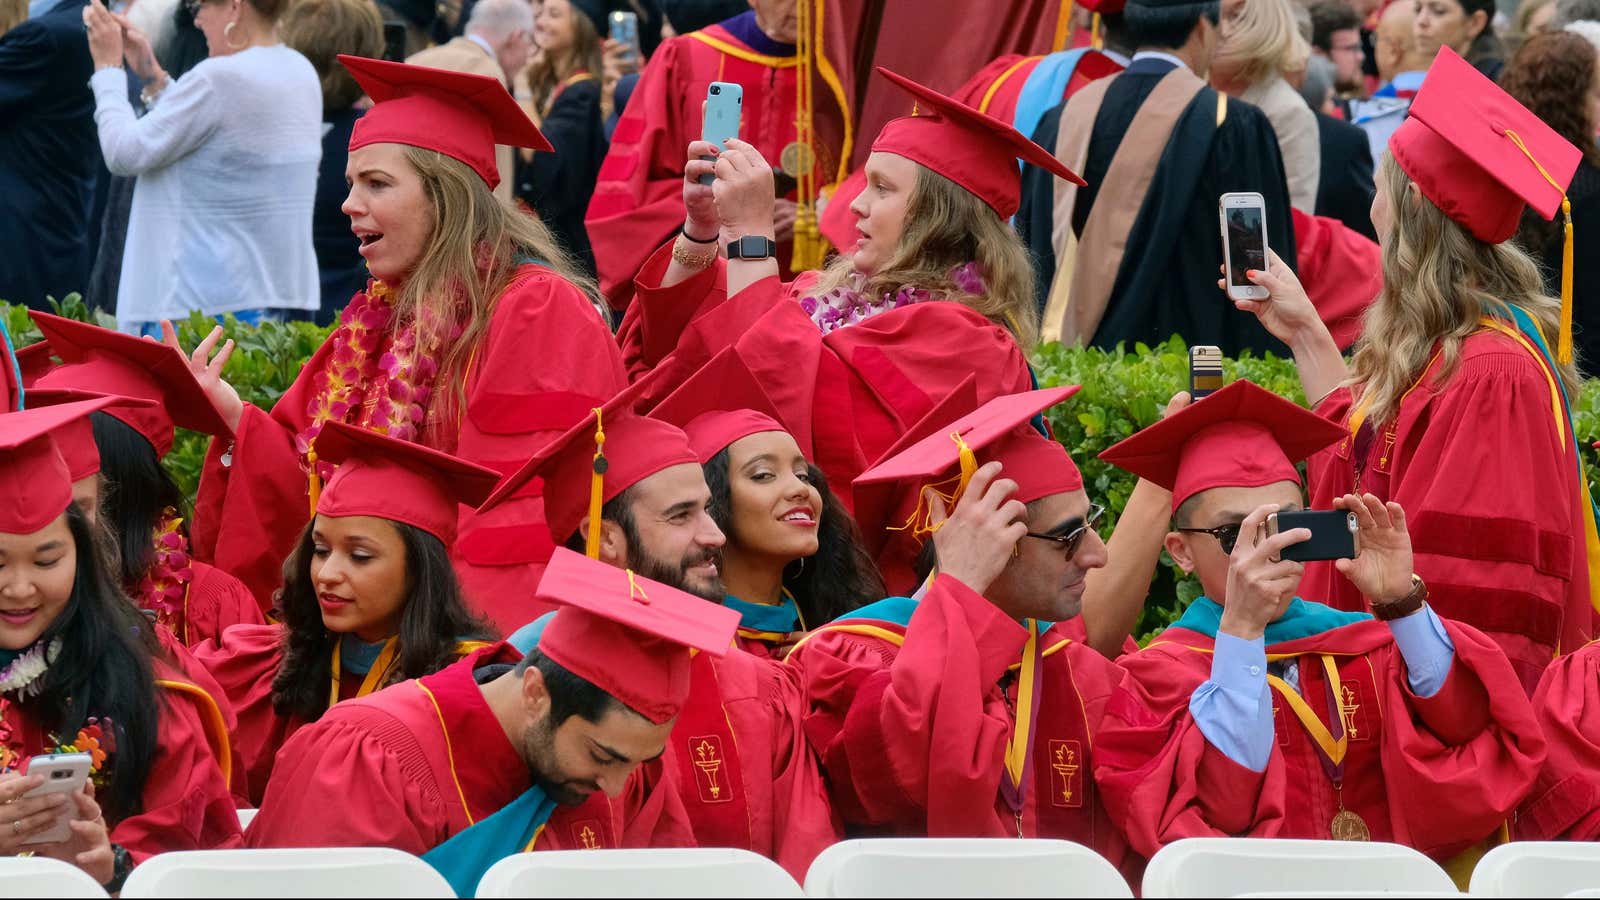 University of Southern California students take photos prior to the 134th commencement ceremony on the USC campus in Los Angeles on Friday, May 12, 2017. (AP Photo/Richard Vogel)